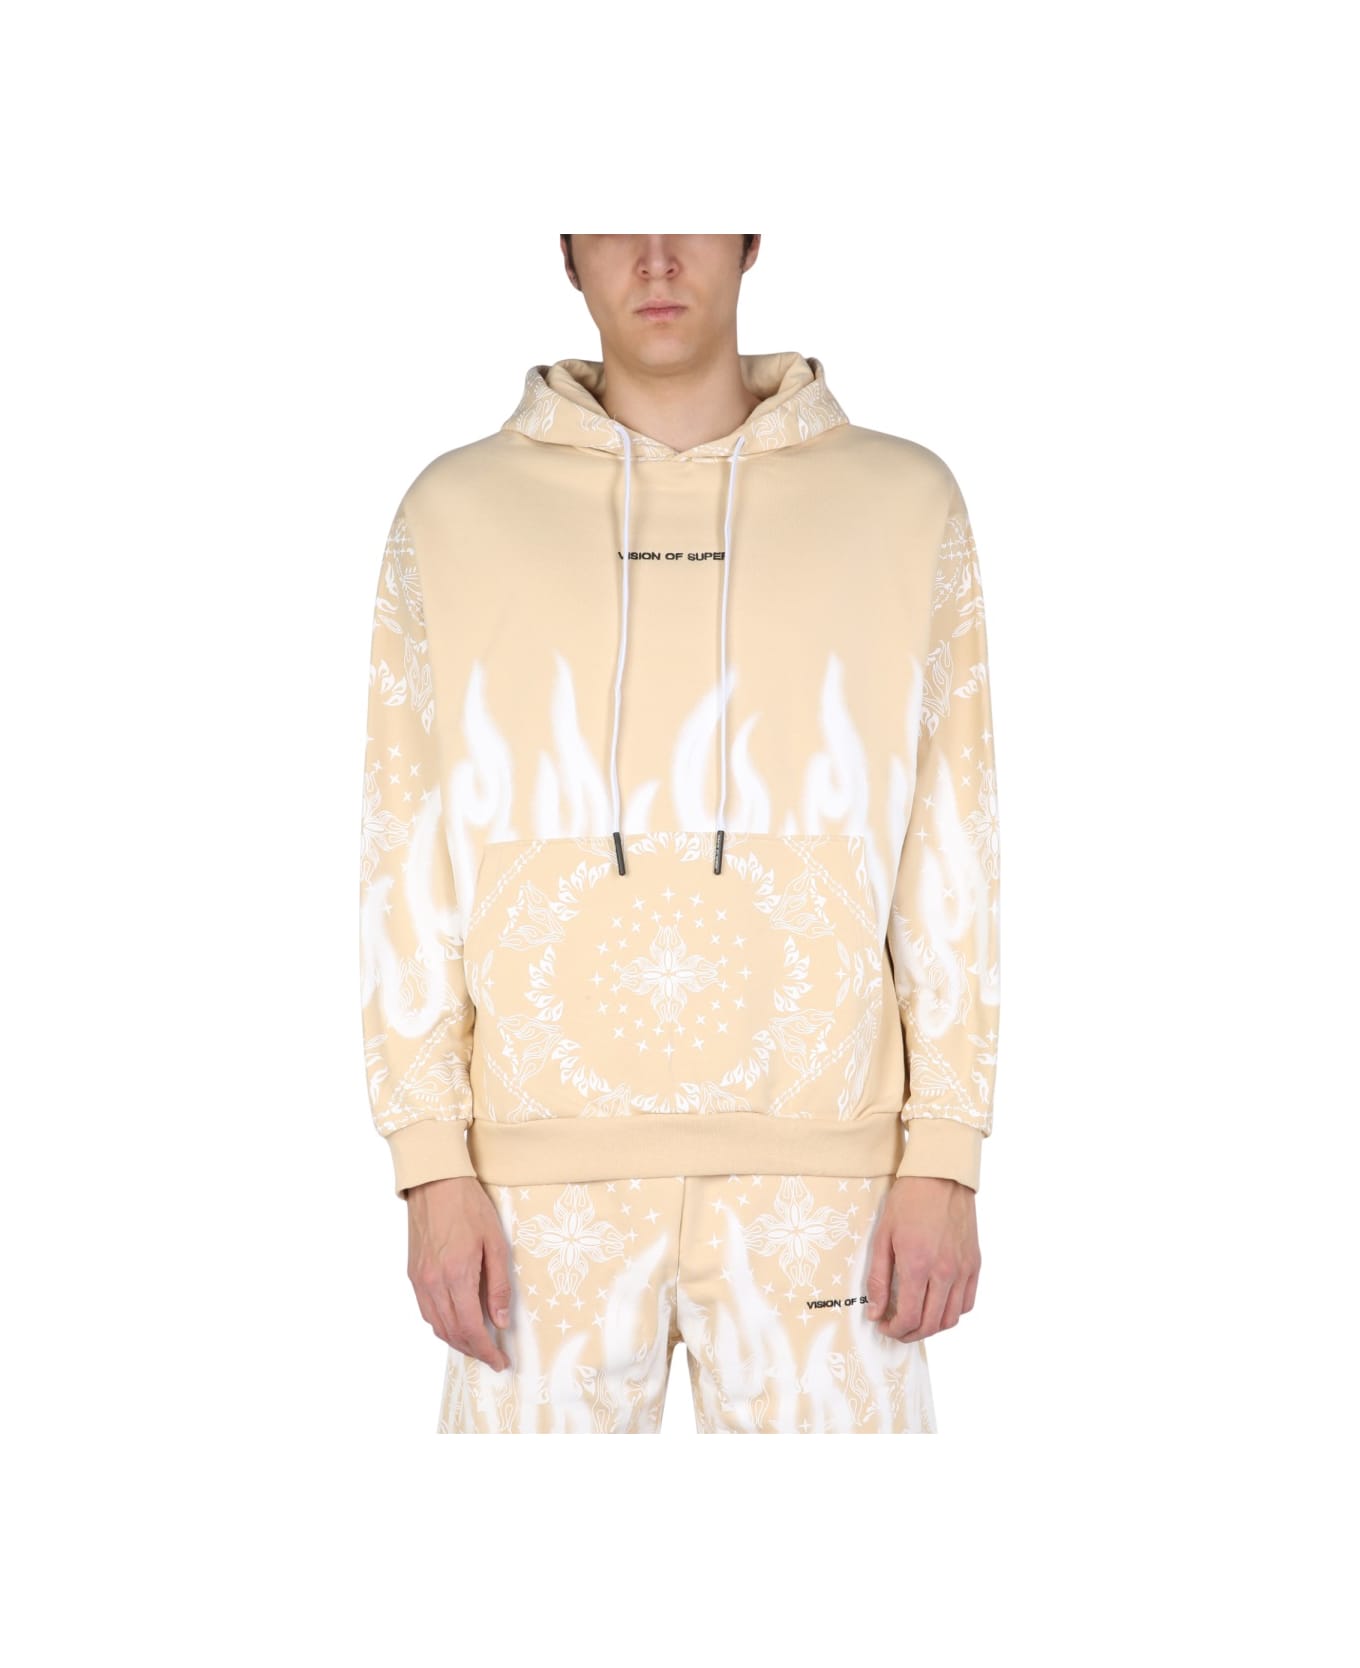 Vision of Super Sweatshirt With Paisley Pattern - BEIGE